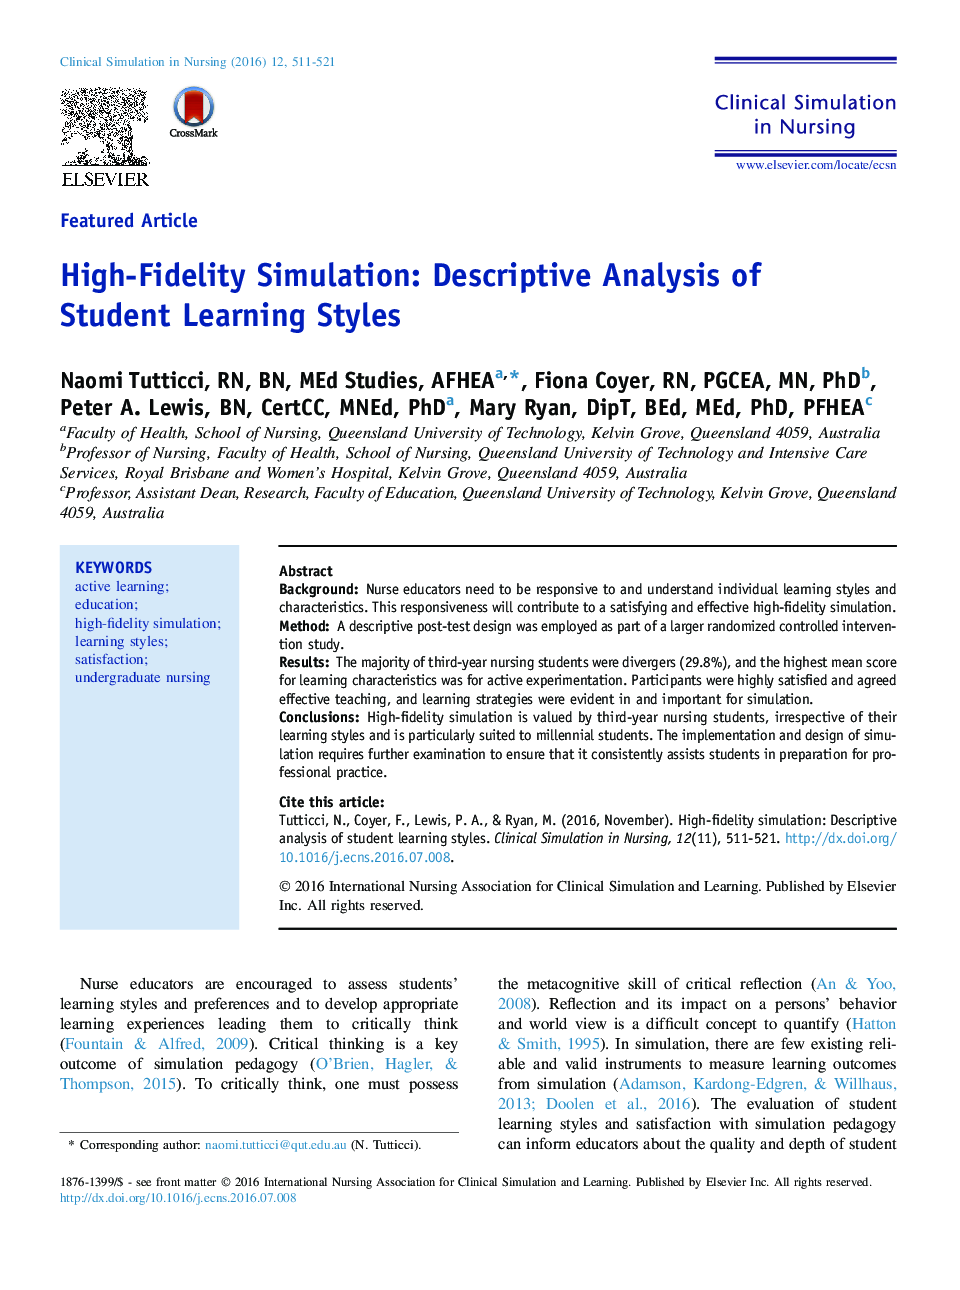 High-Fidelity Simulation: Descriptive Analysis of Student Learning Styles